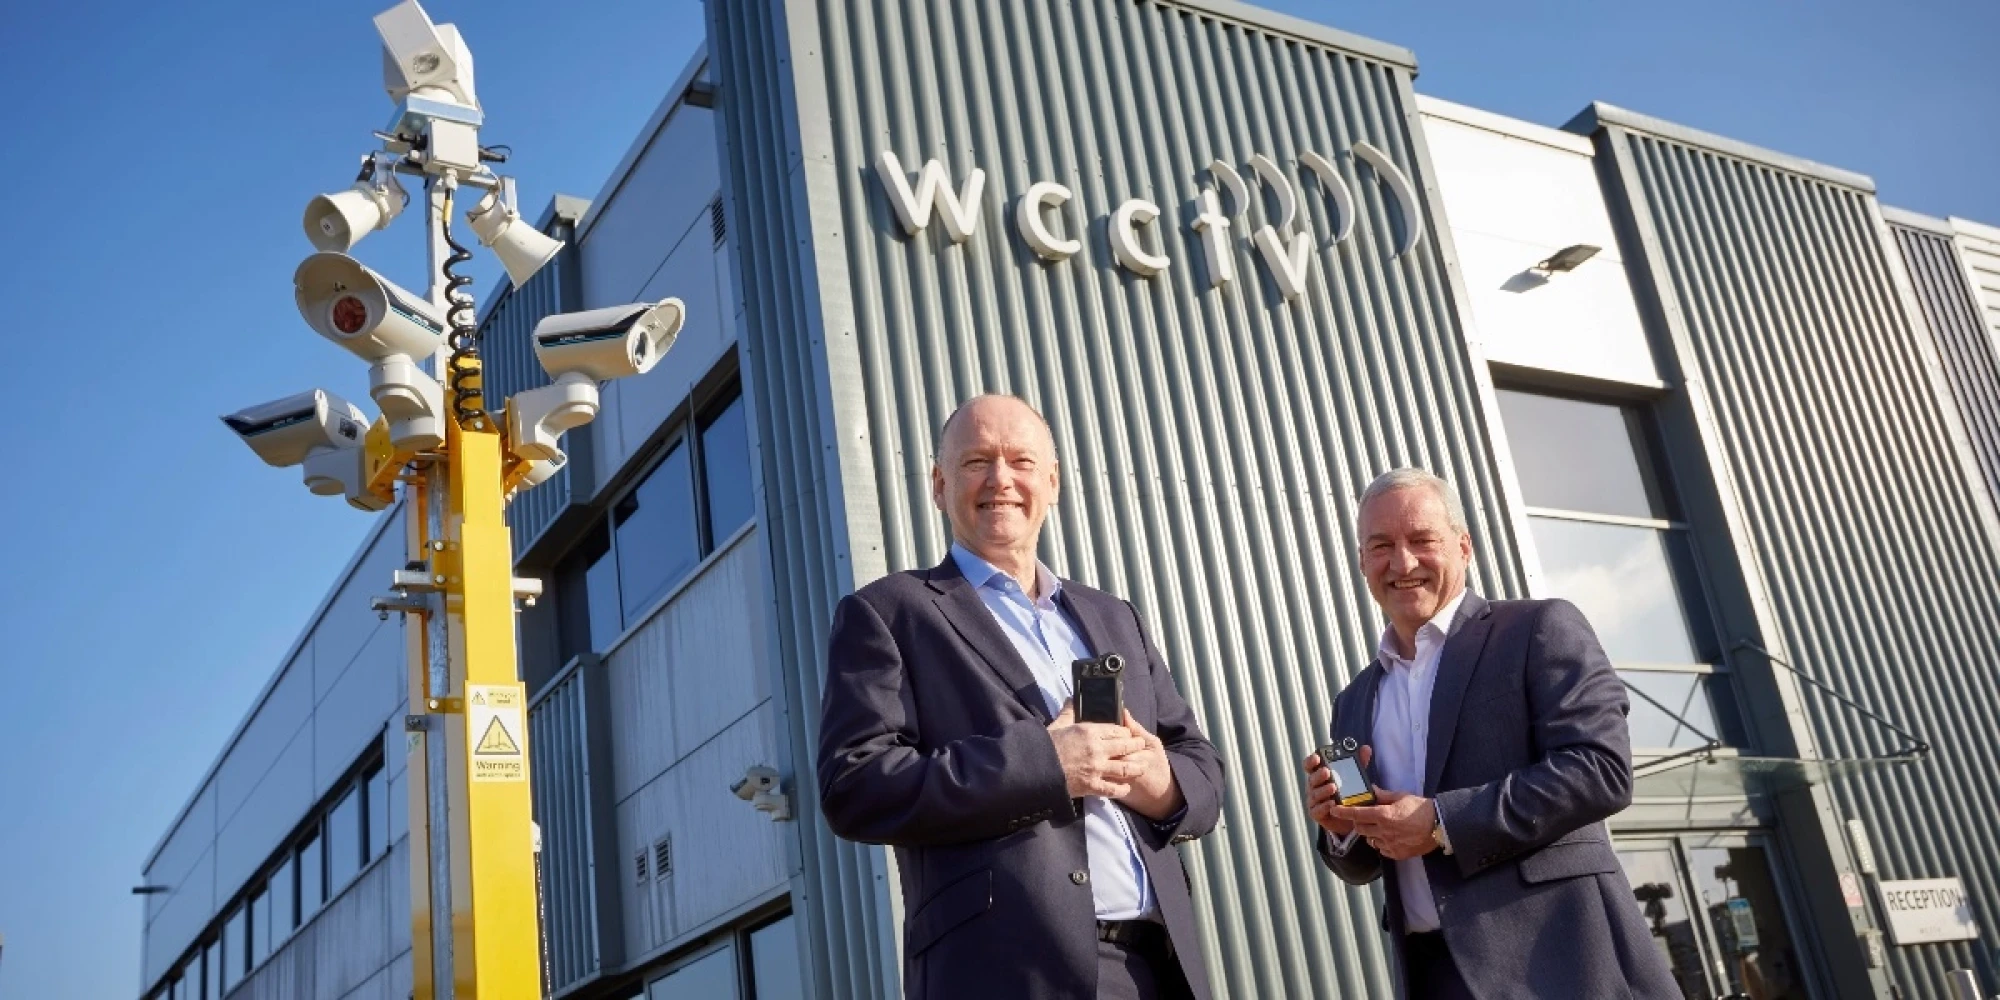 WCCTV's Chairman and CEO Pictured Outside the Company's Headquarters